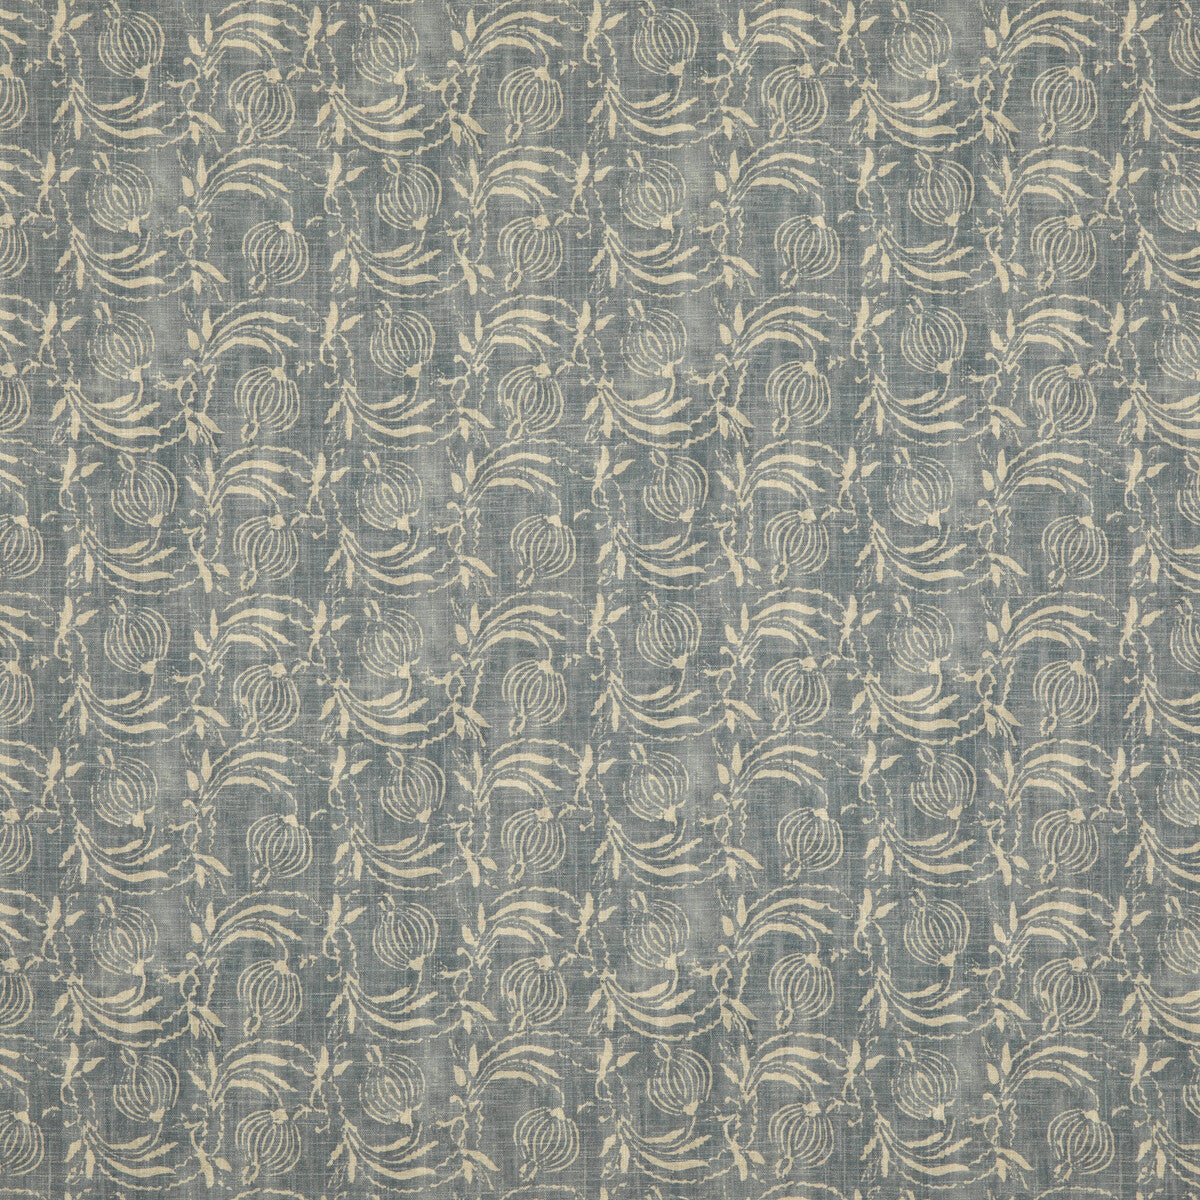 Pomegranate fabric in denim color - pattern BP10825.2.0 - by G P &amp; J Baker in the Coromandel Small Prints collection